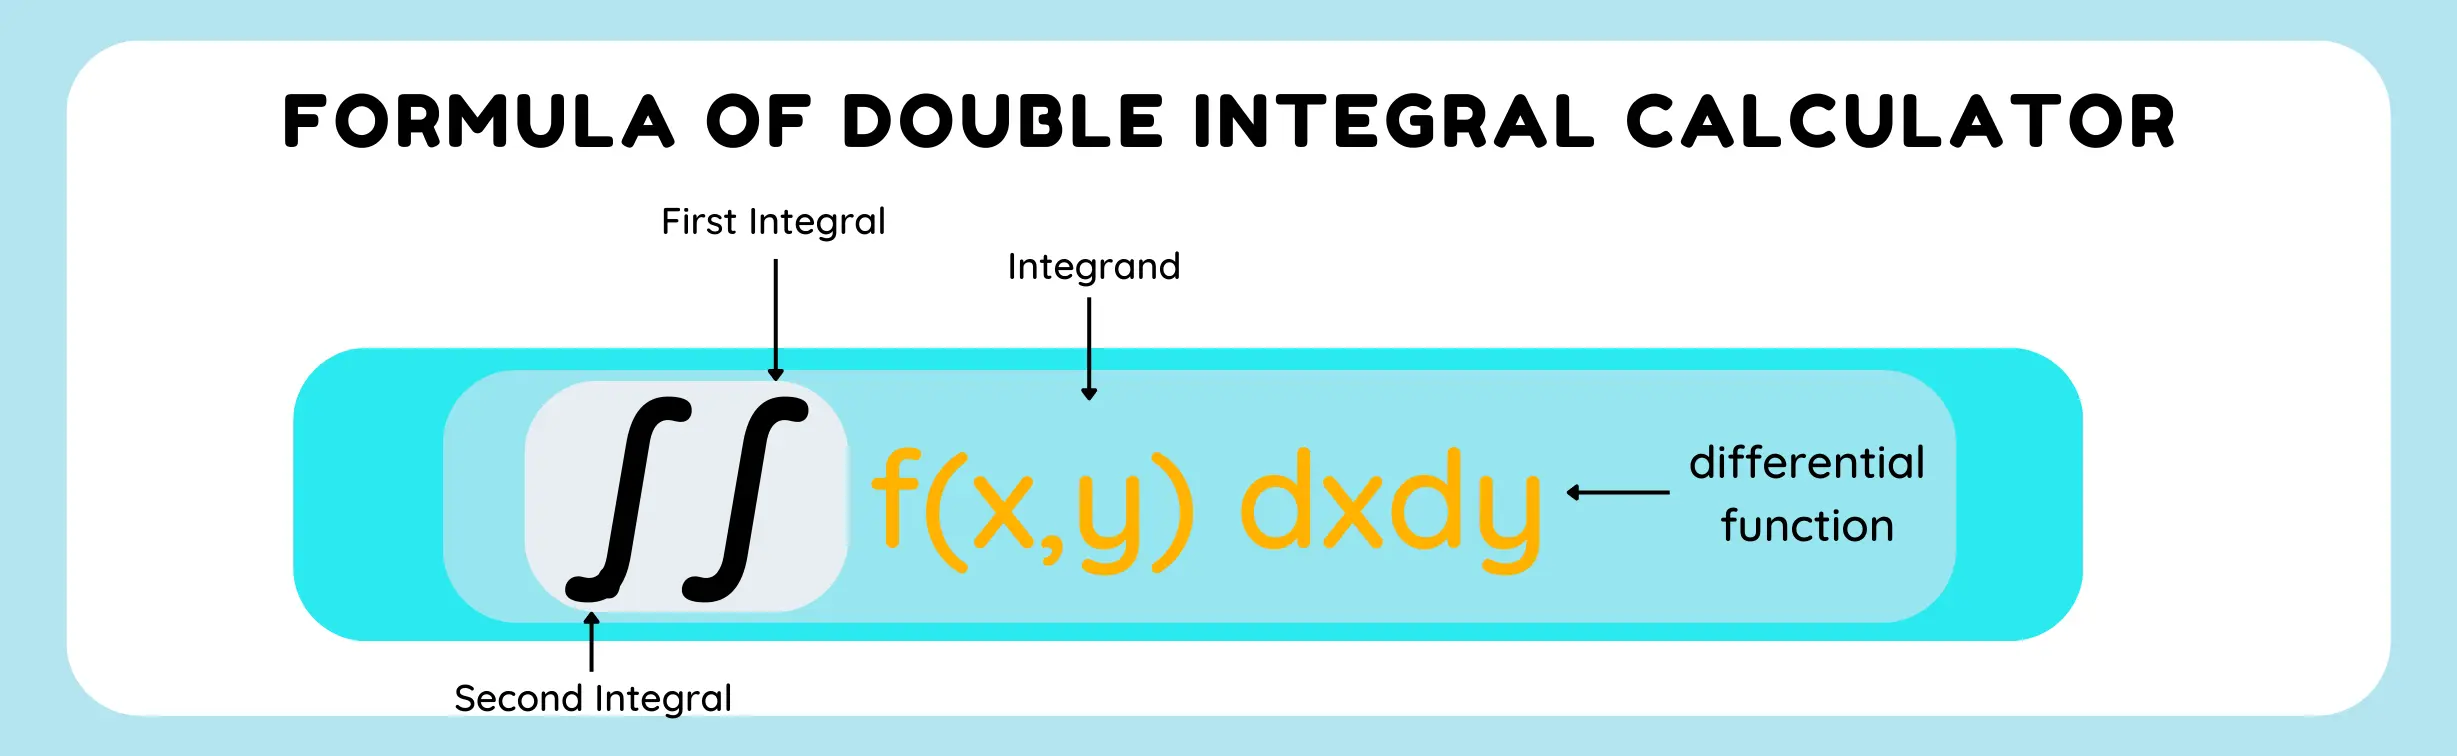 formula used by double integral calculator